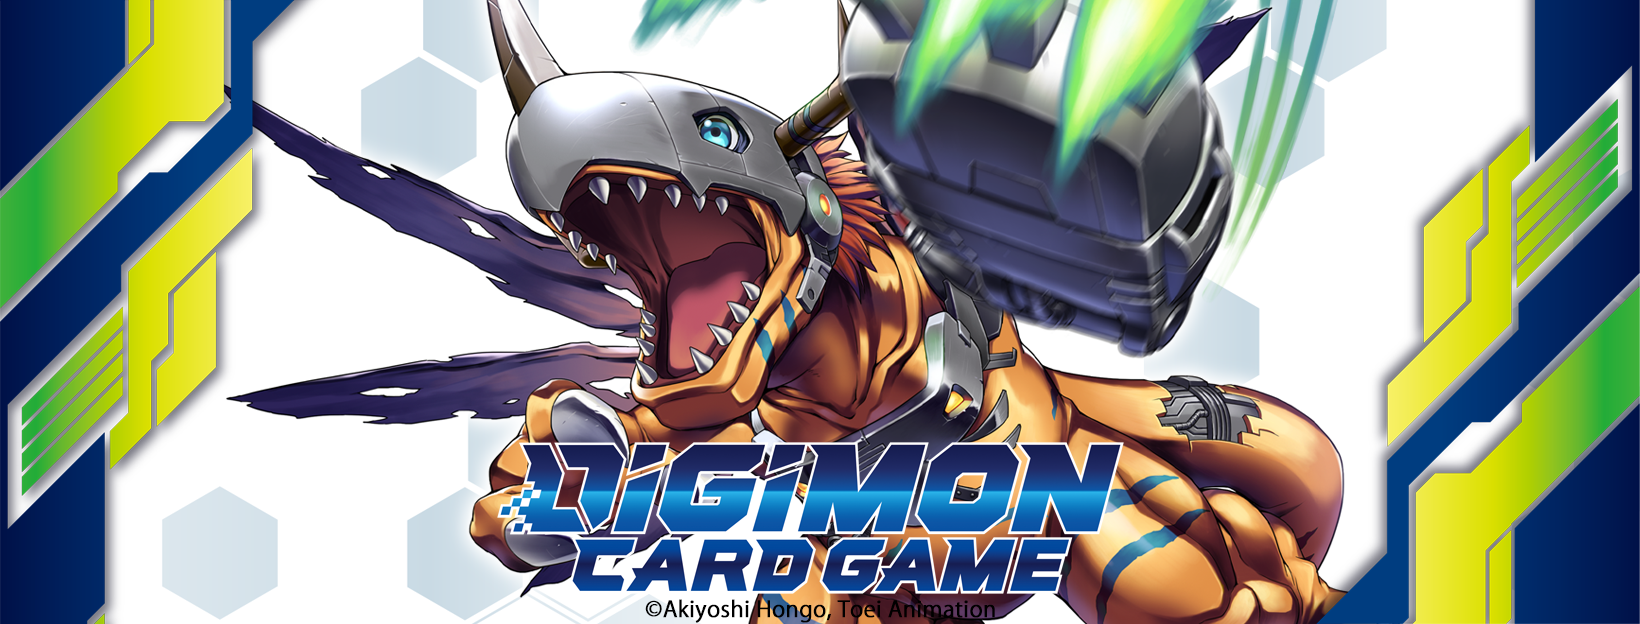 Digimon Card Game Cover